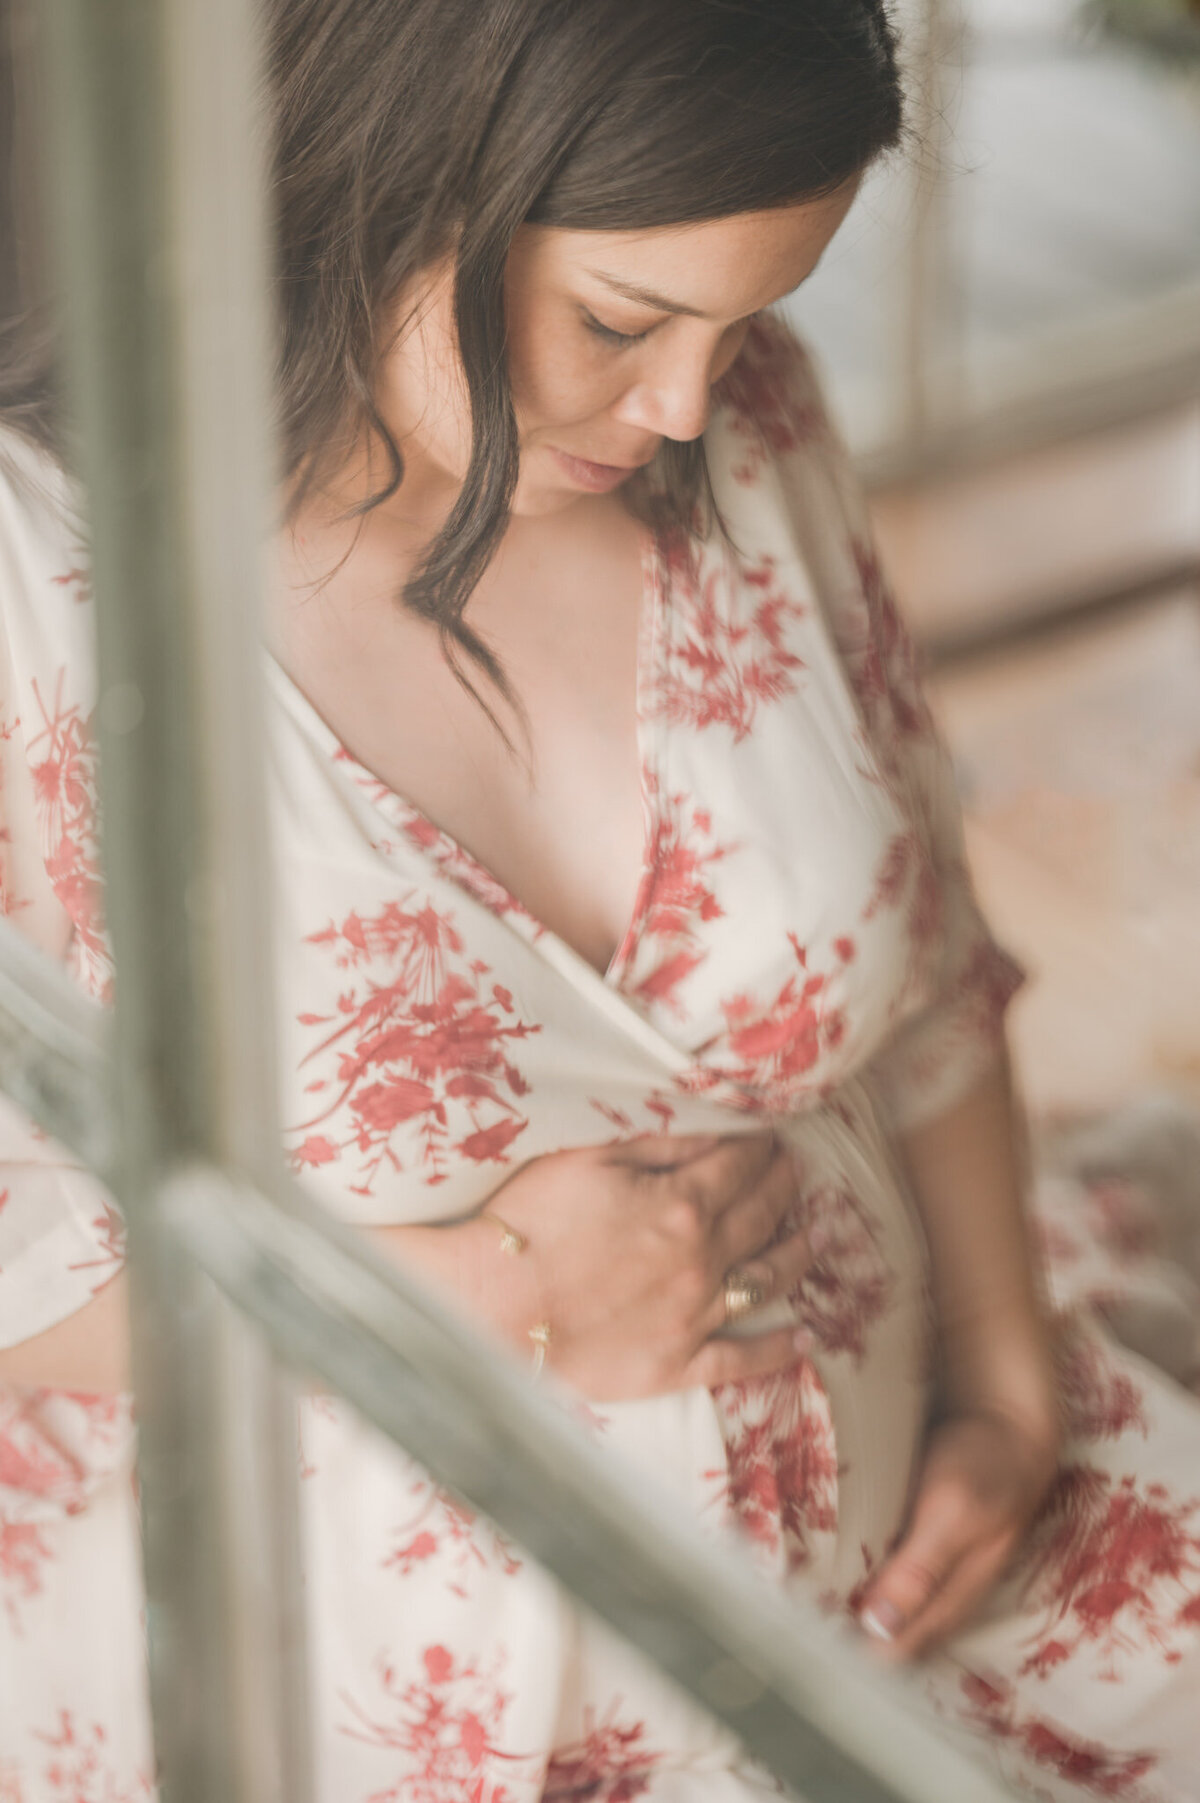 Image shot through a window by San Antonio maternity photographer Cassey Golden of an expecting mom gazing at her bump.